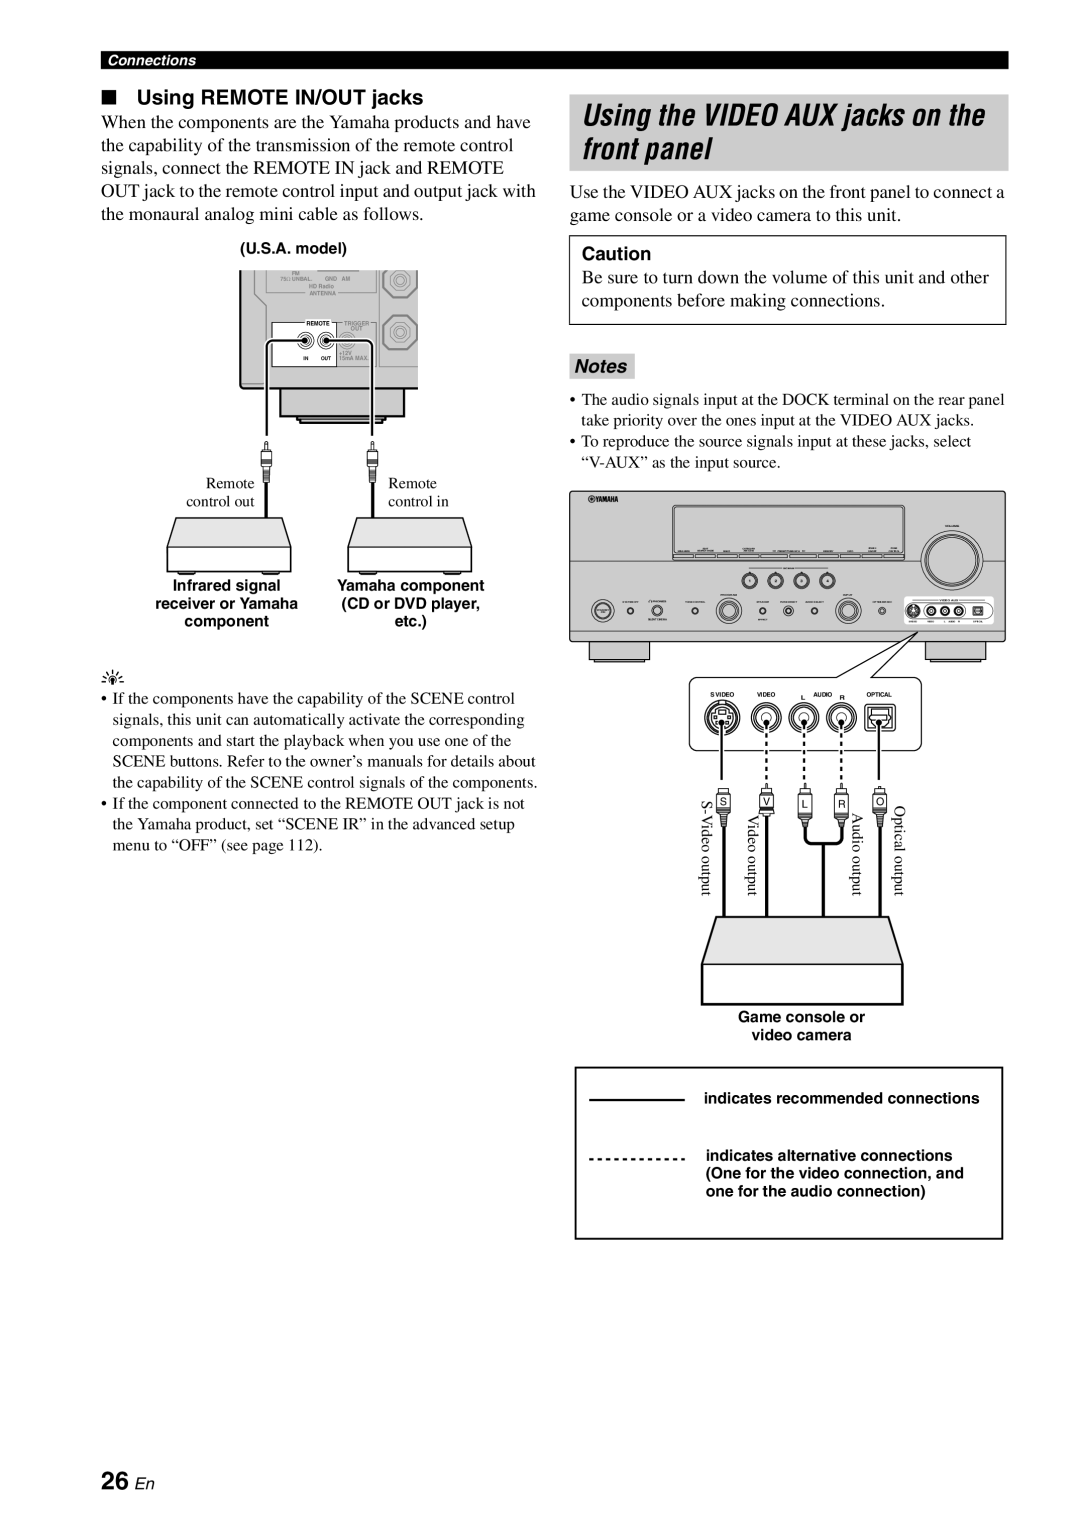 Yamaha HTR-6180 owner manual Using the VIDEO AUX jacks on the front panel, 26 En, Using REMOTE IN/OUT jacks, Notes 